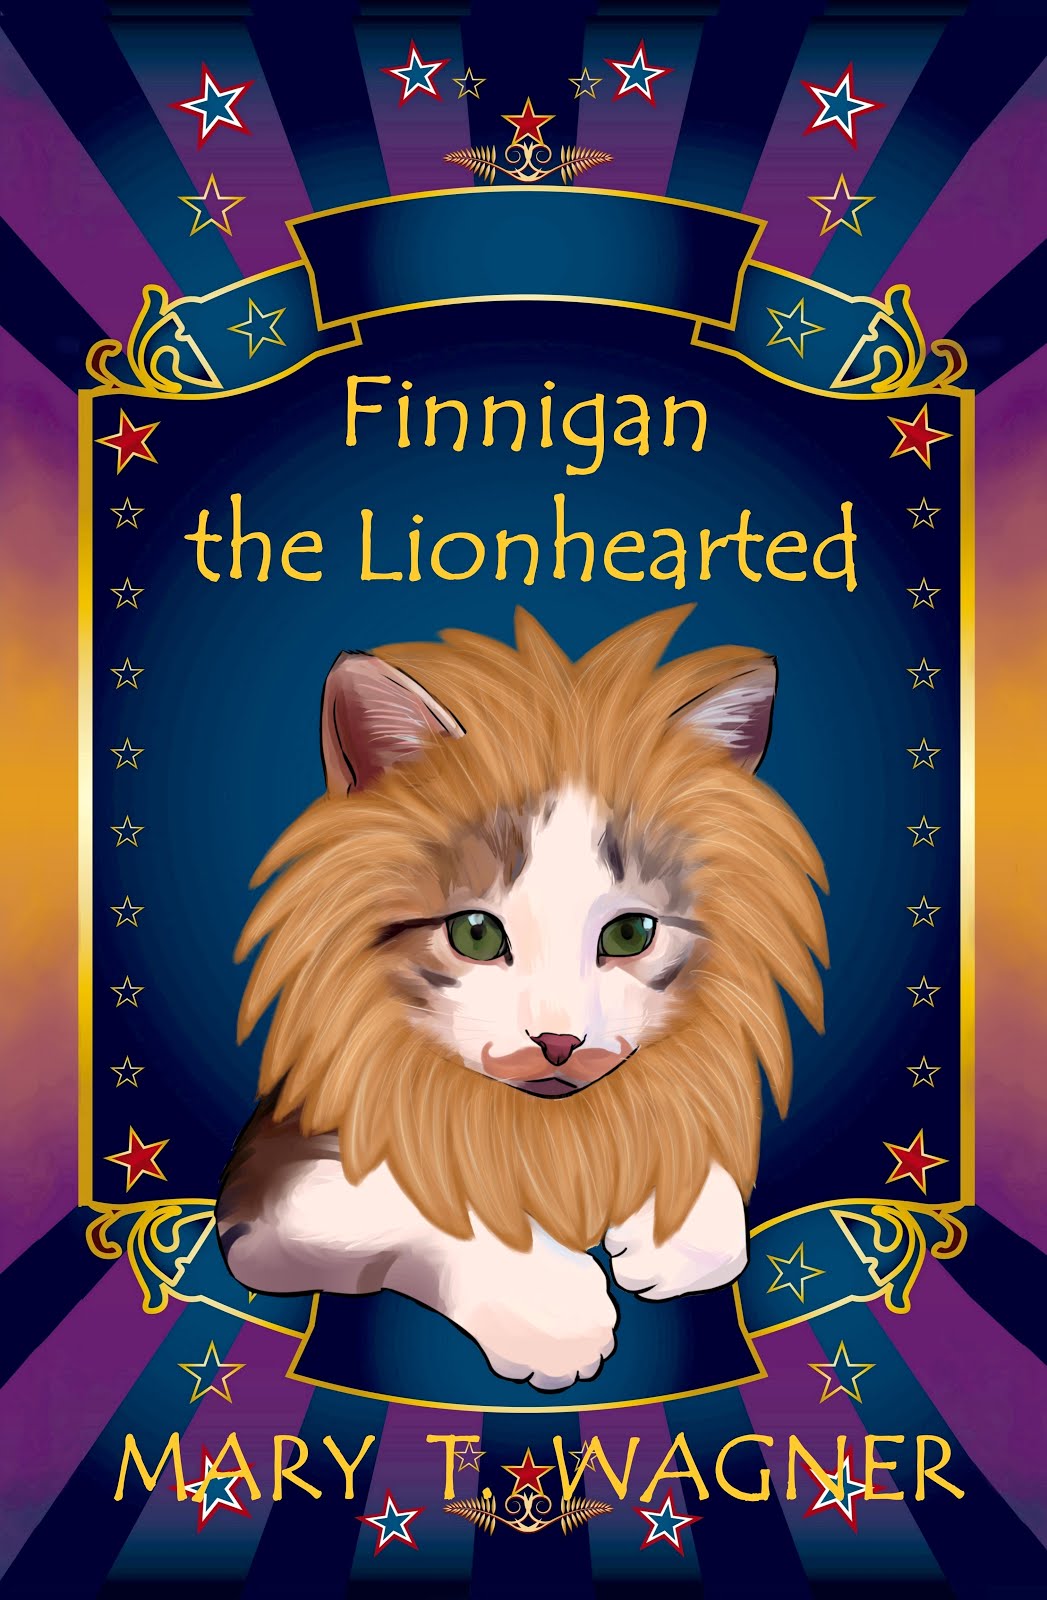 Book 3 of the Finnigan Series!